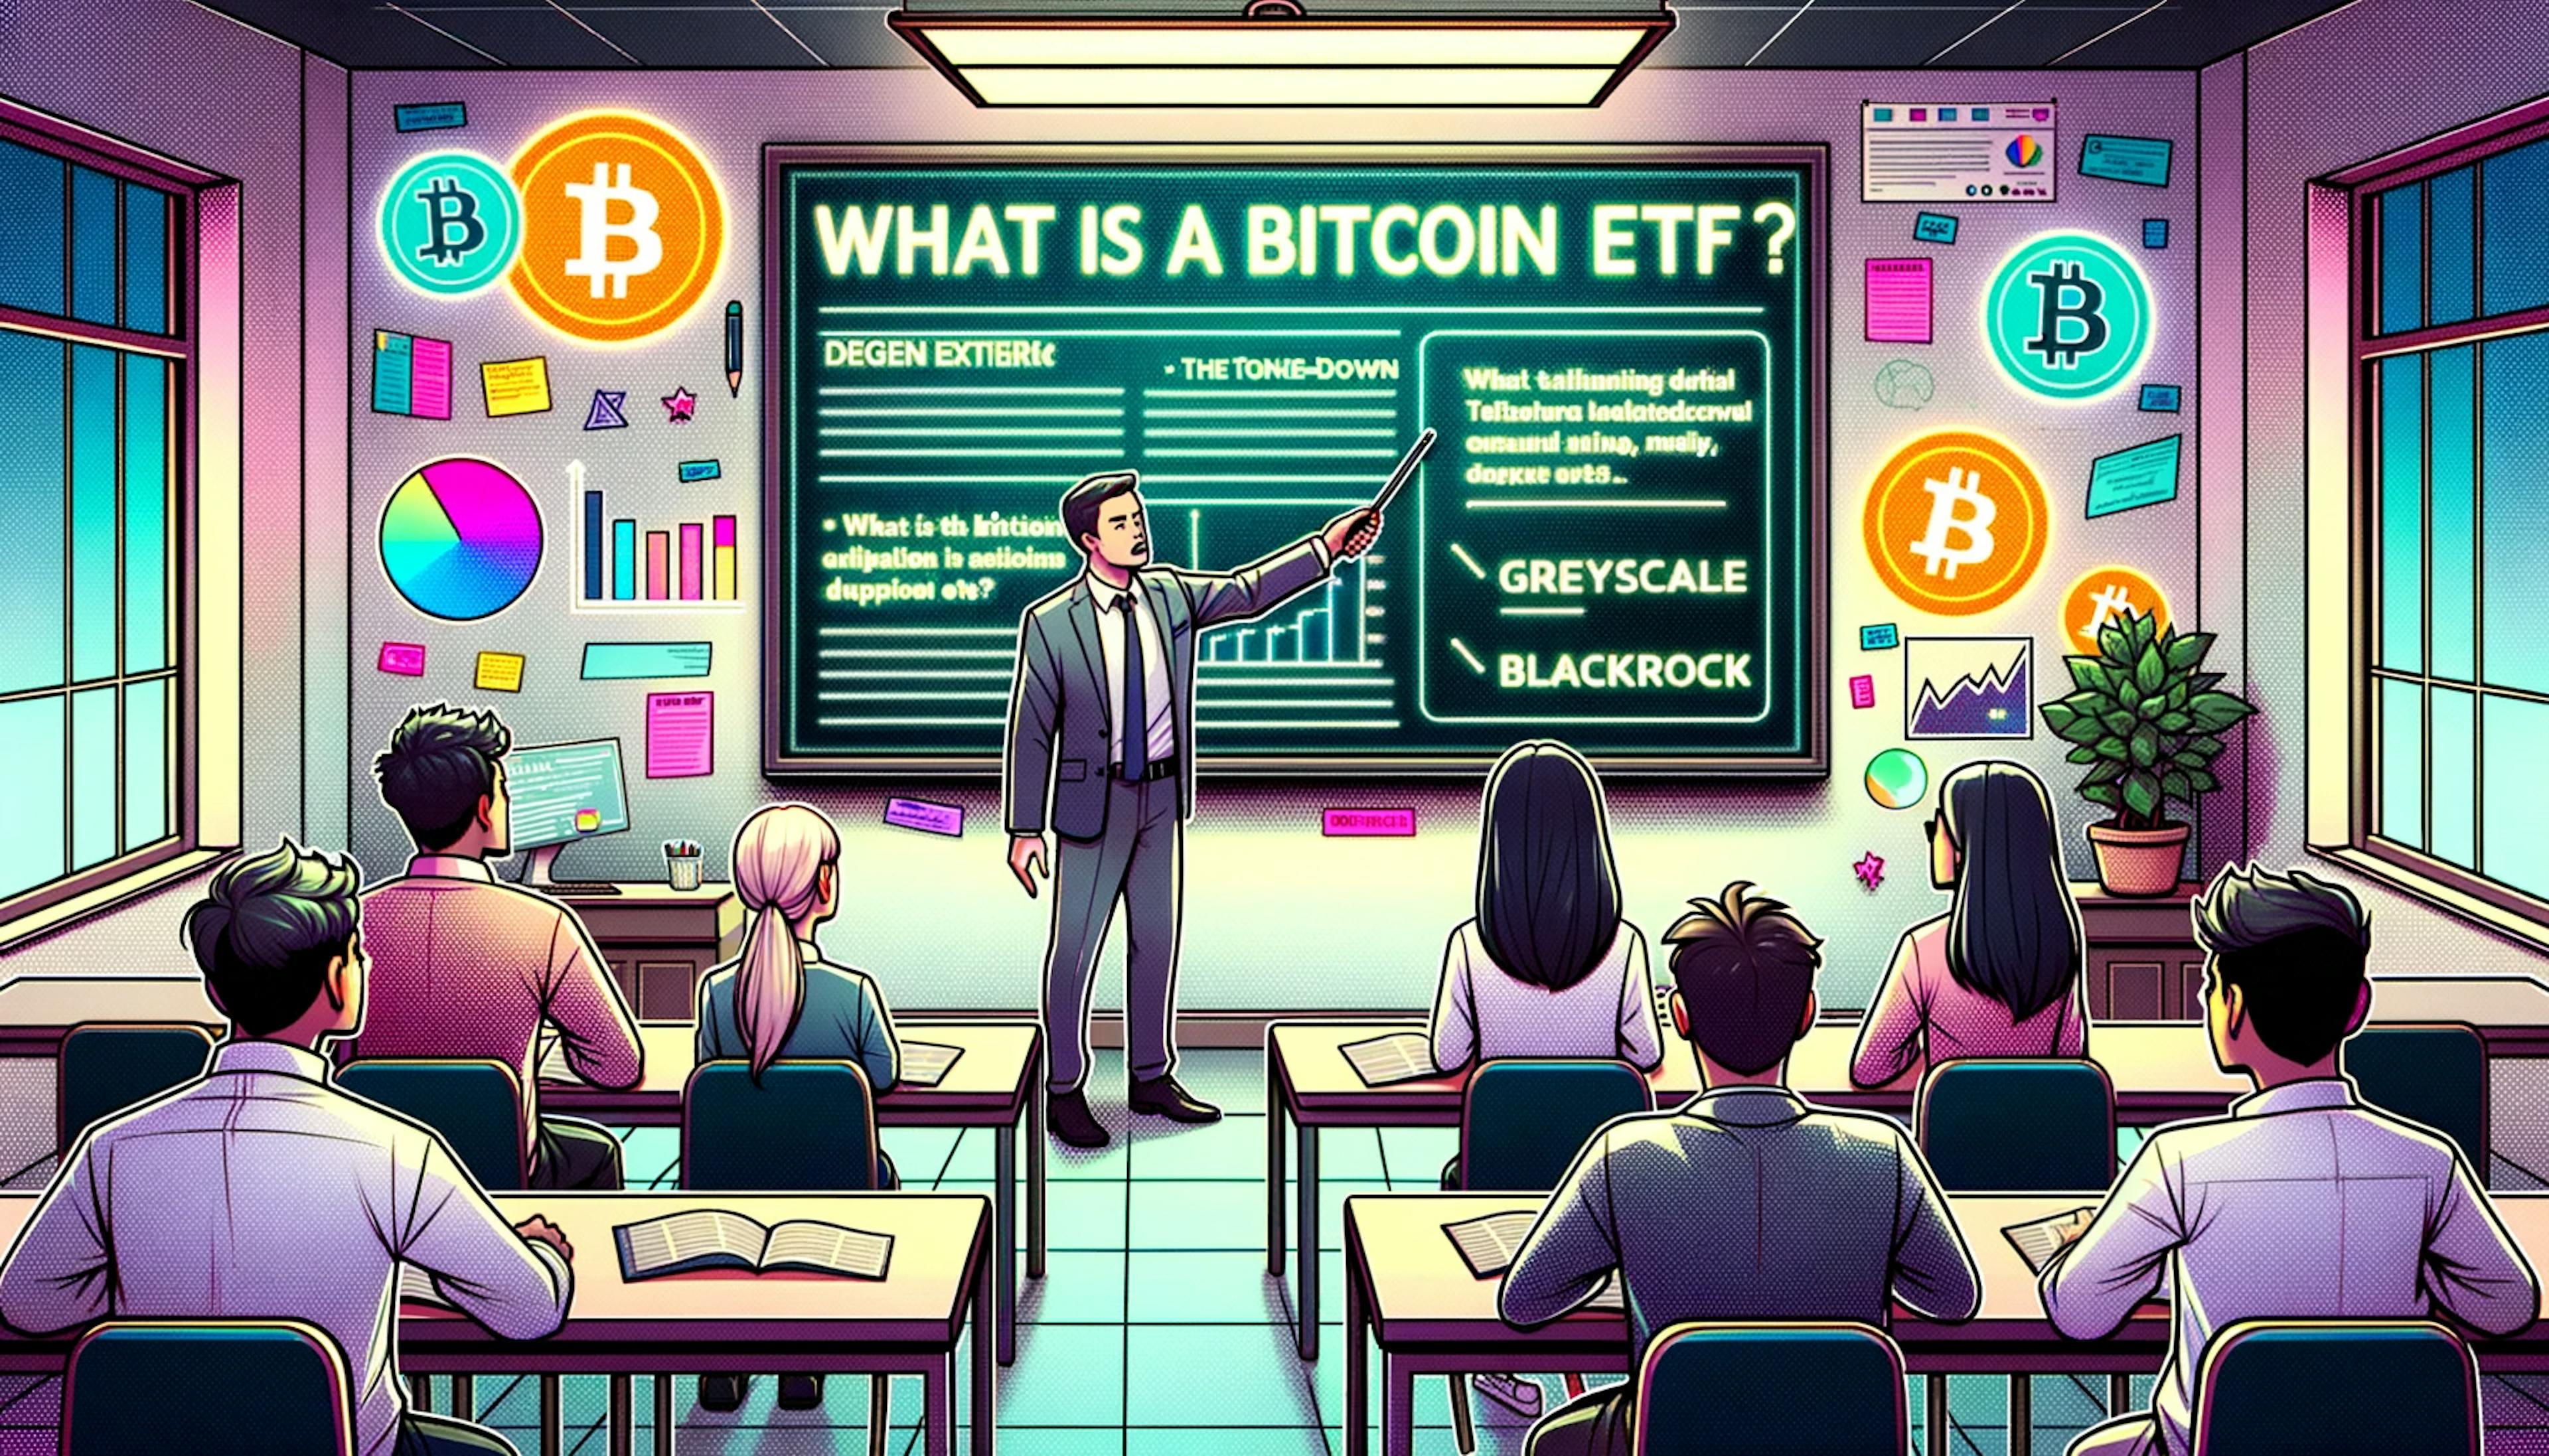 What is an ETF and a Bitcoin ETF?